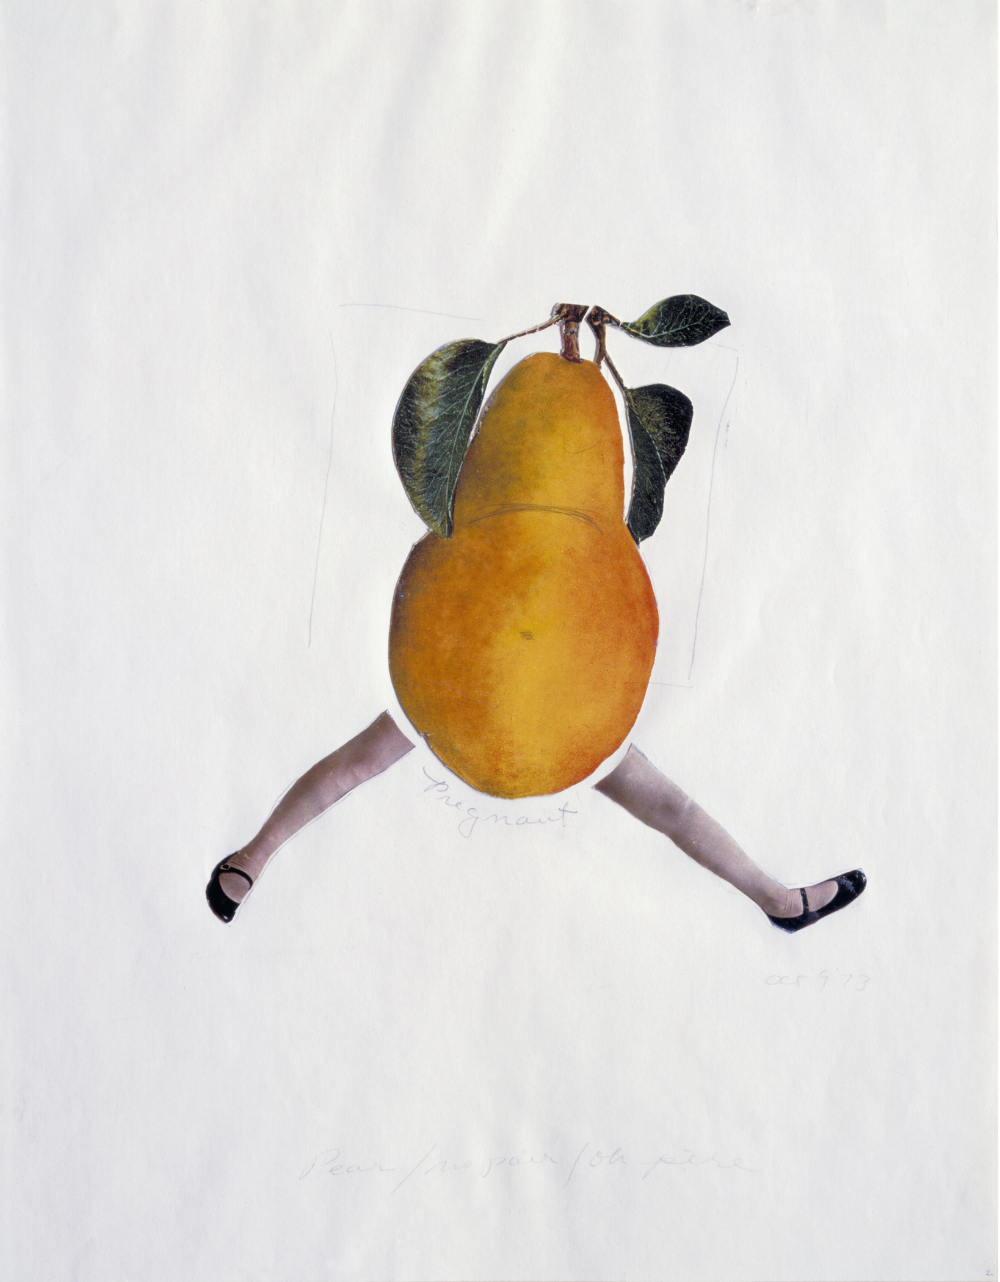 A photo collage showing a yellow pear with two legs, placed on a white paper background.